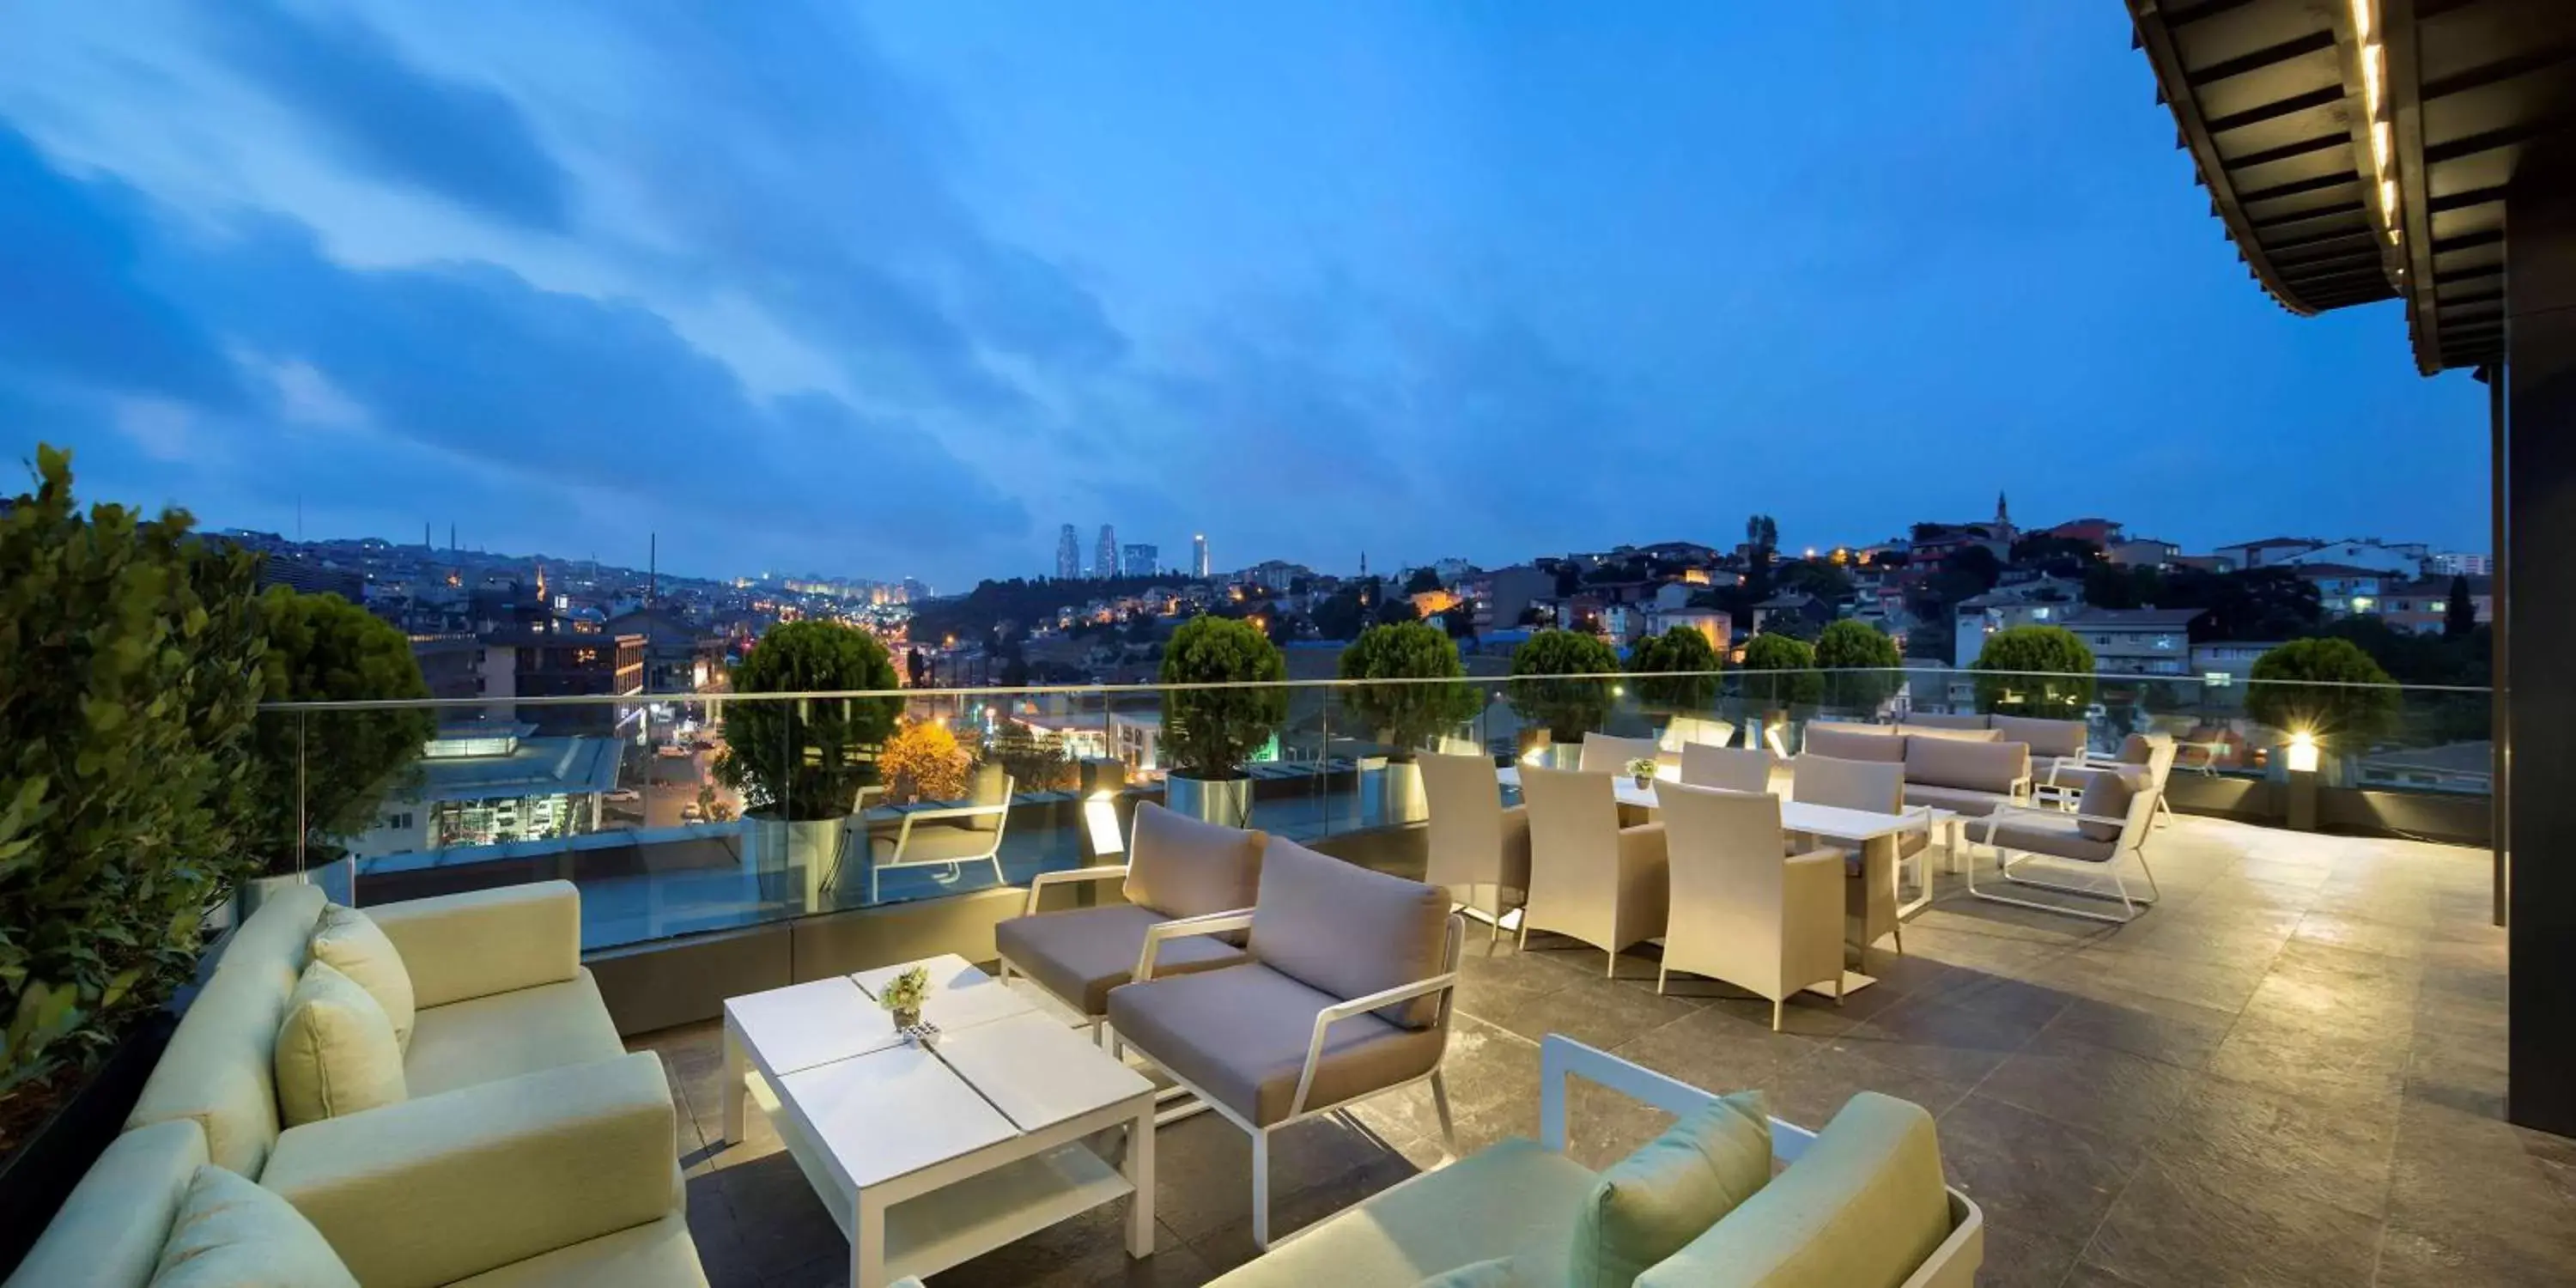 Restaurant/places to eat in DoubleTree by Hilton Istanbul - Piyalepasa